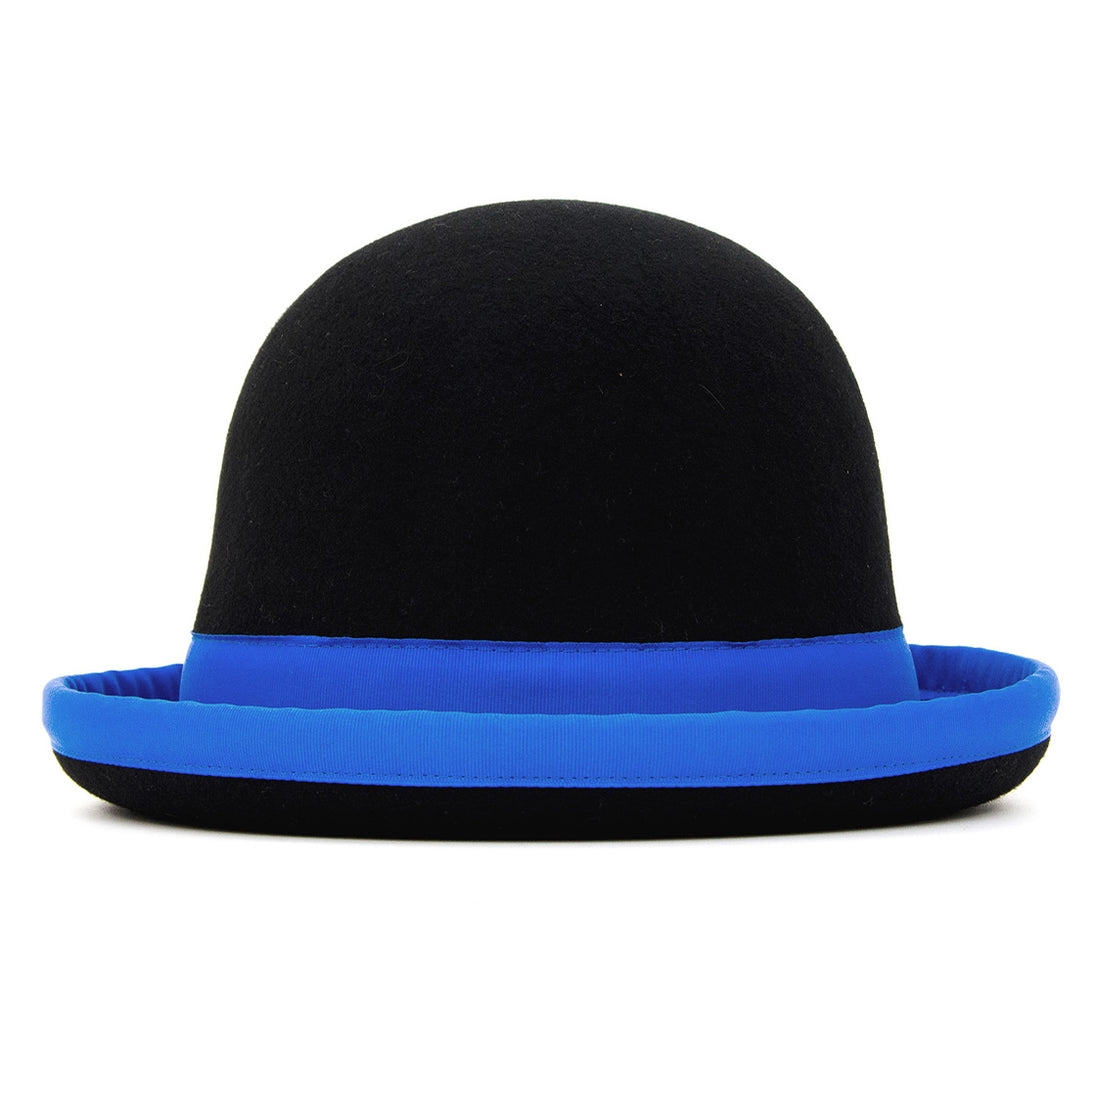 Black with blue trim Hat from side